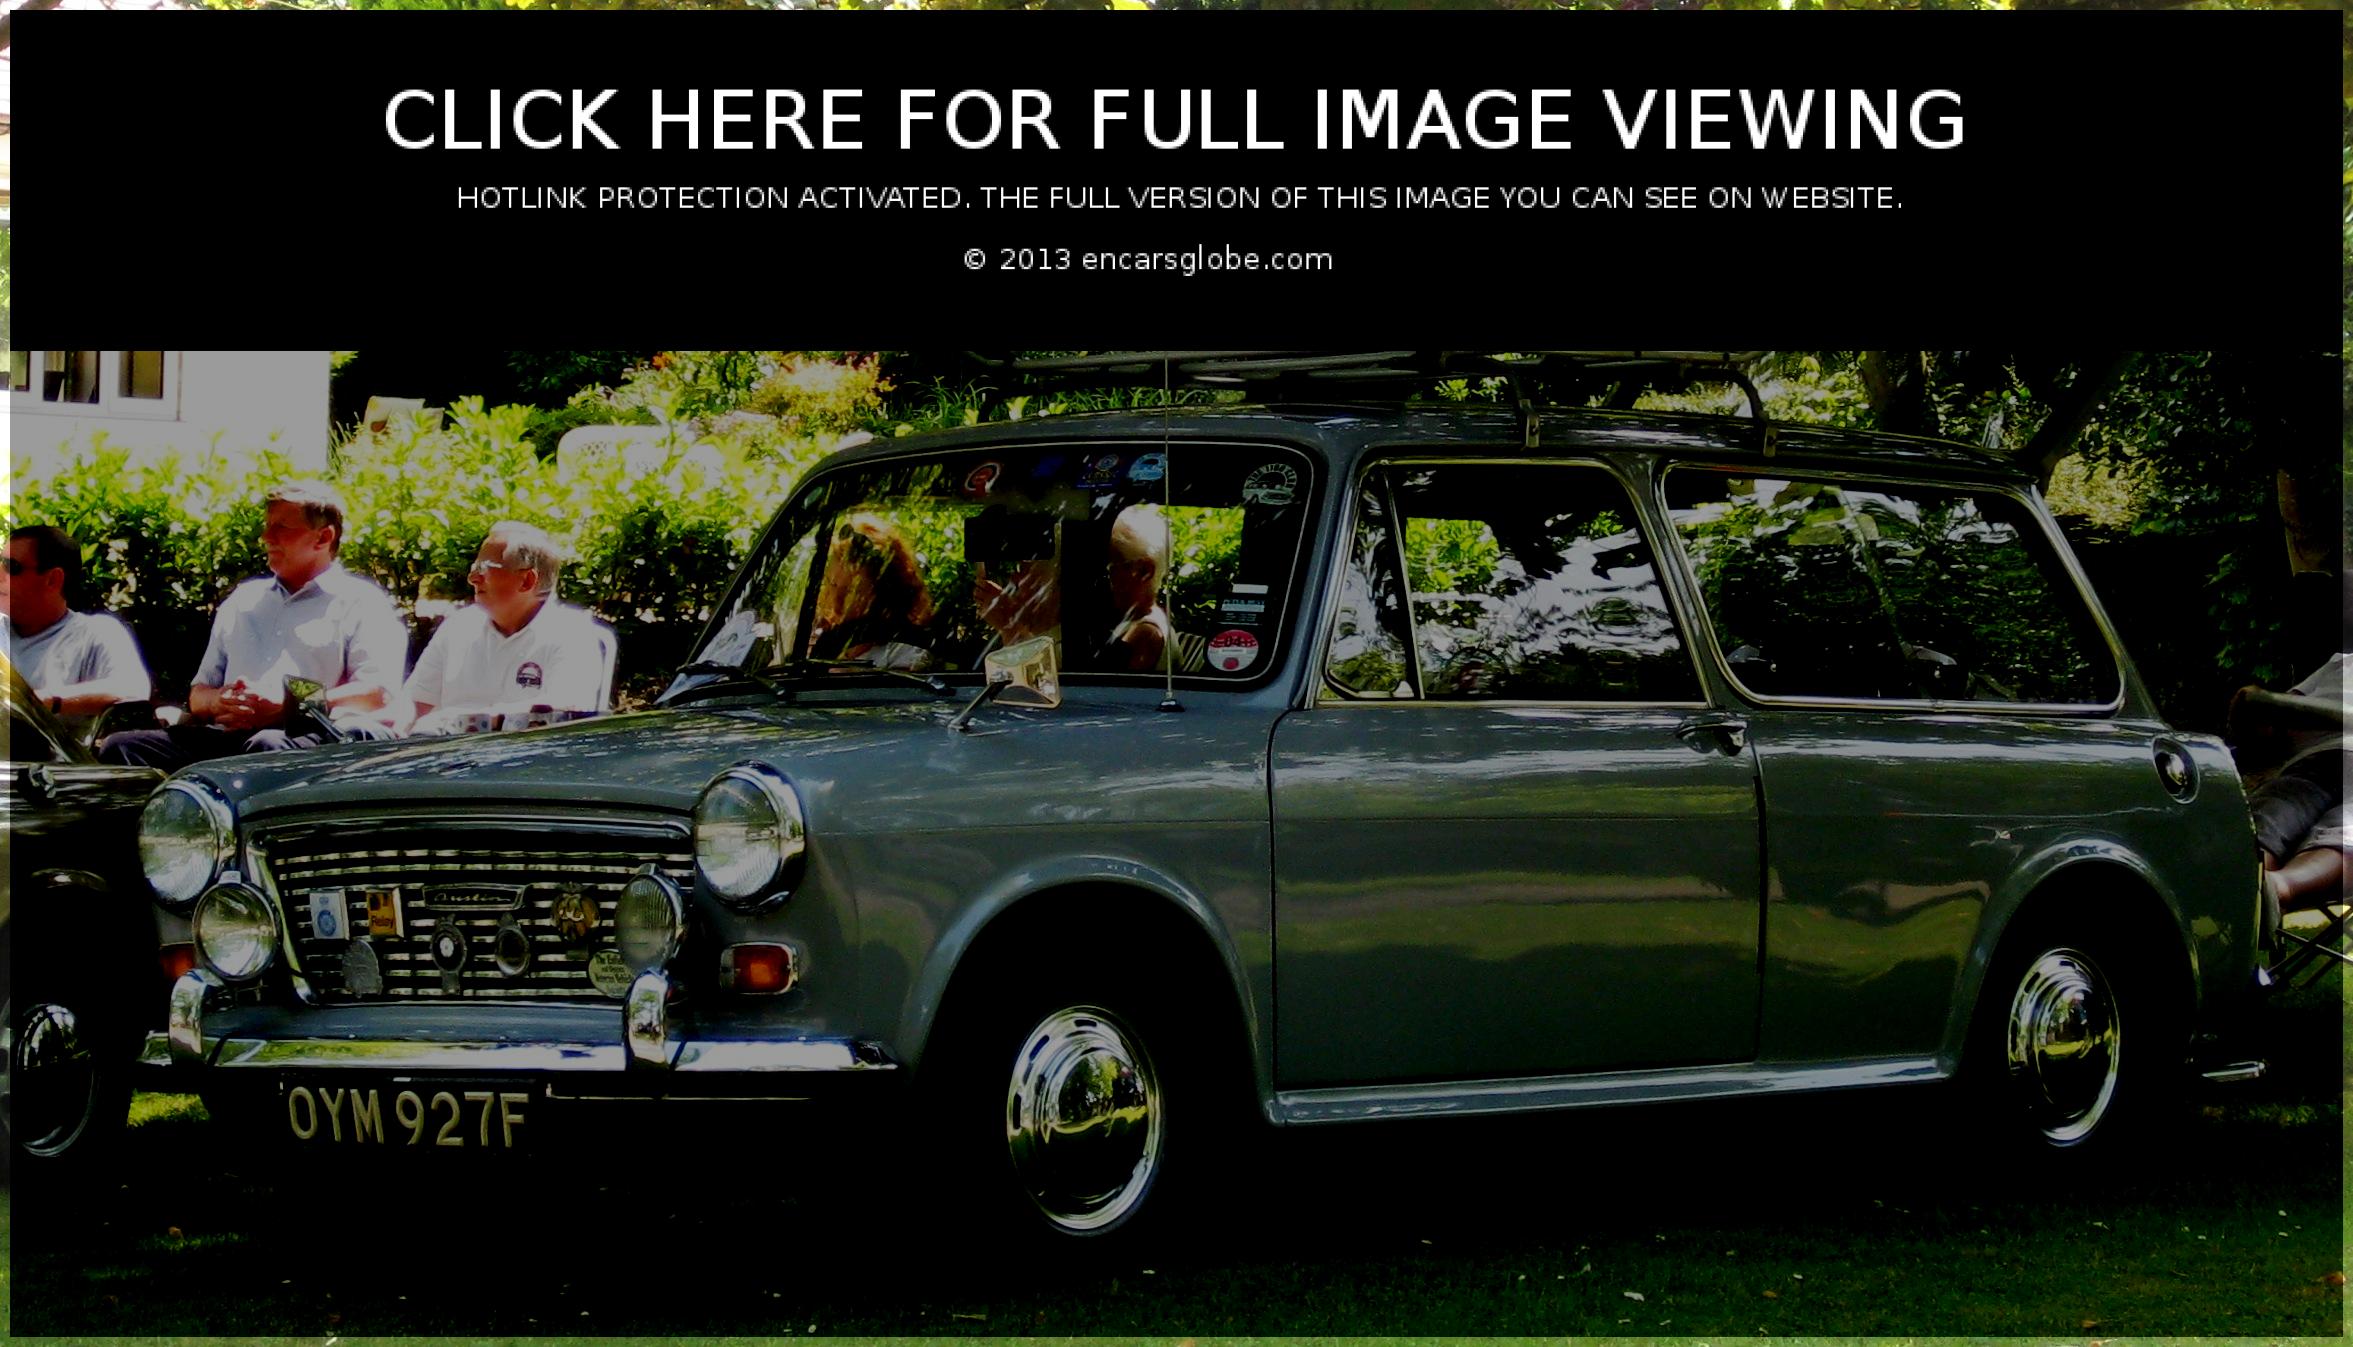 Austin 1100 Photo Gallery: Photo #12 out of 9, Image Size - 2353 x ...